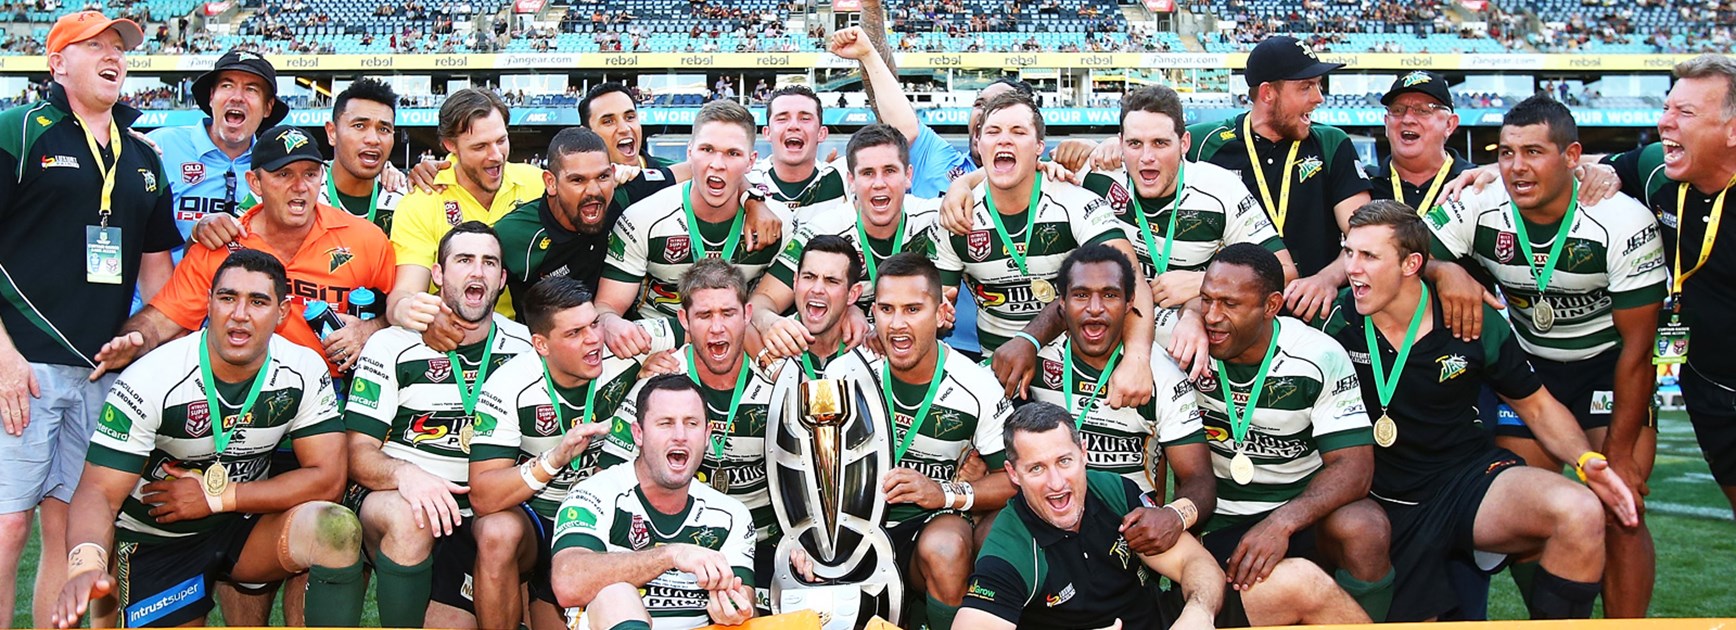 The Ipswich Jets won the Intrust Super Cup and State Championship in 2015 with their free-flowing, all-out-attack style.